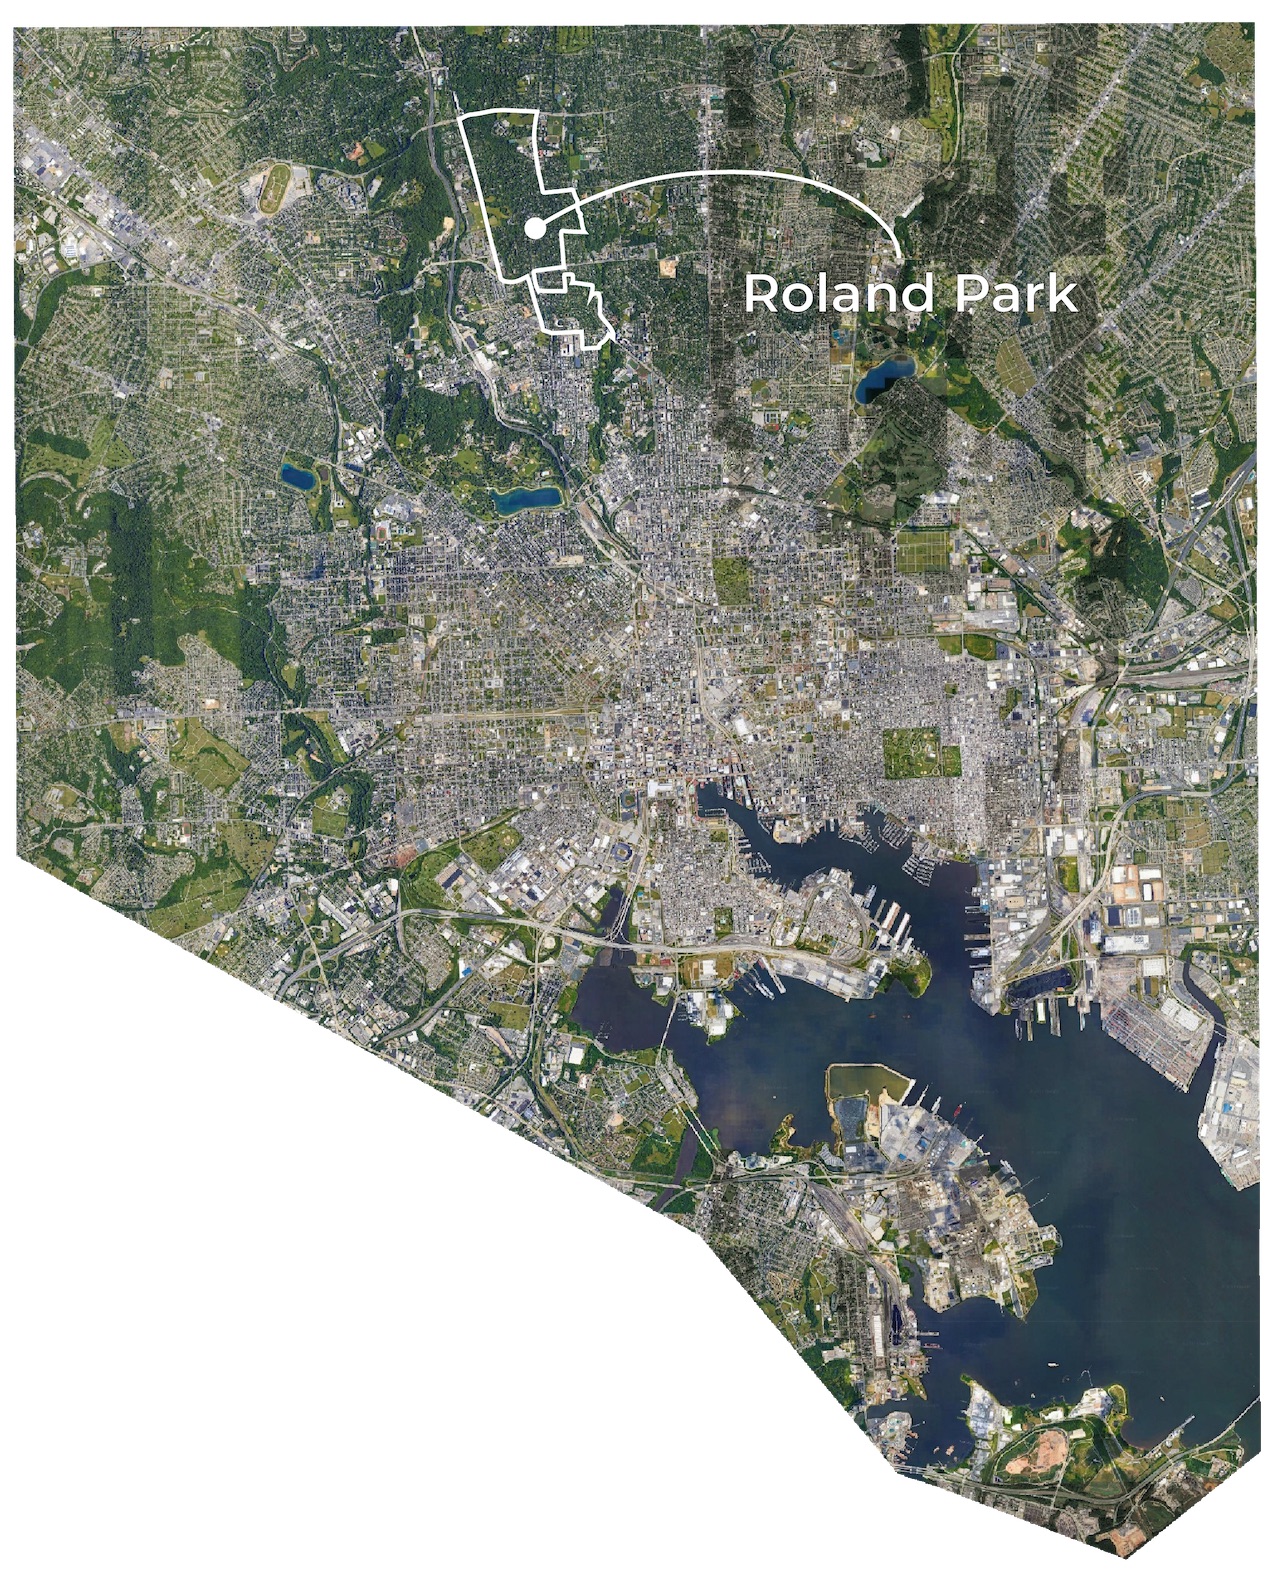 Same satellite photo of Baltimore, now with Roland Park outlined.